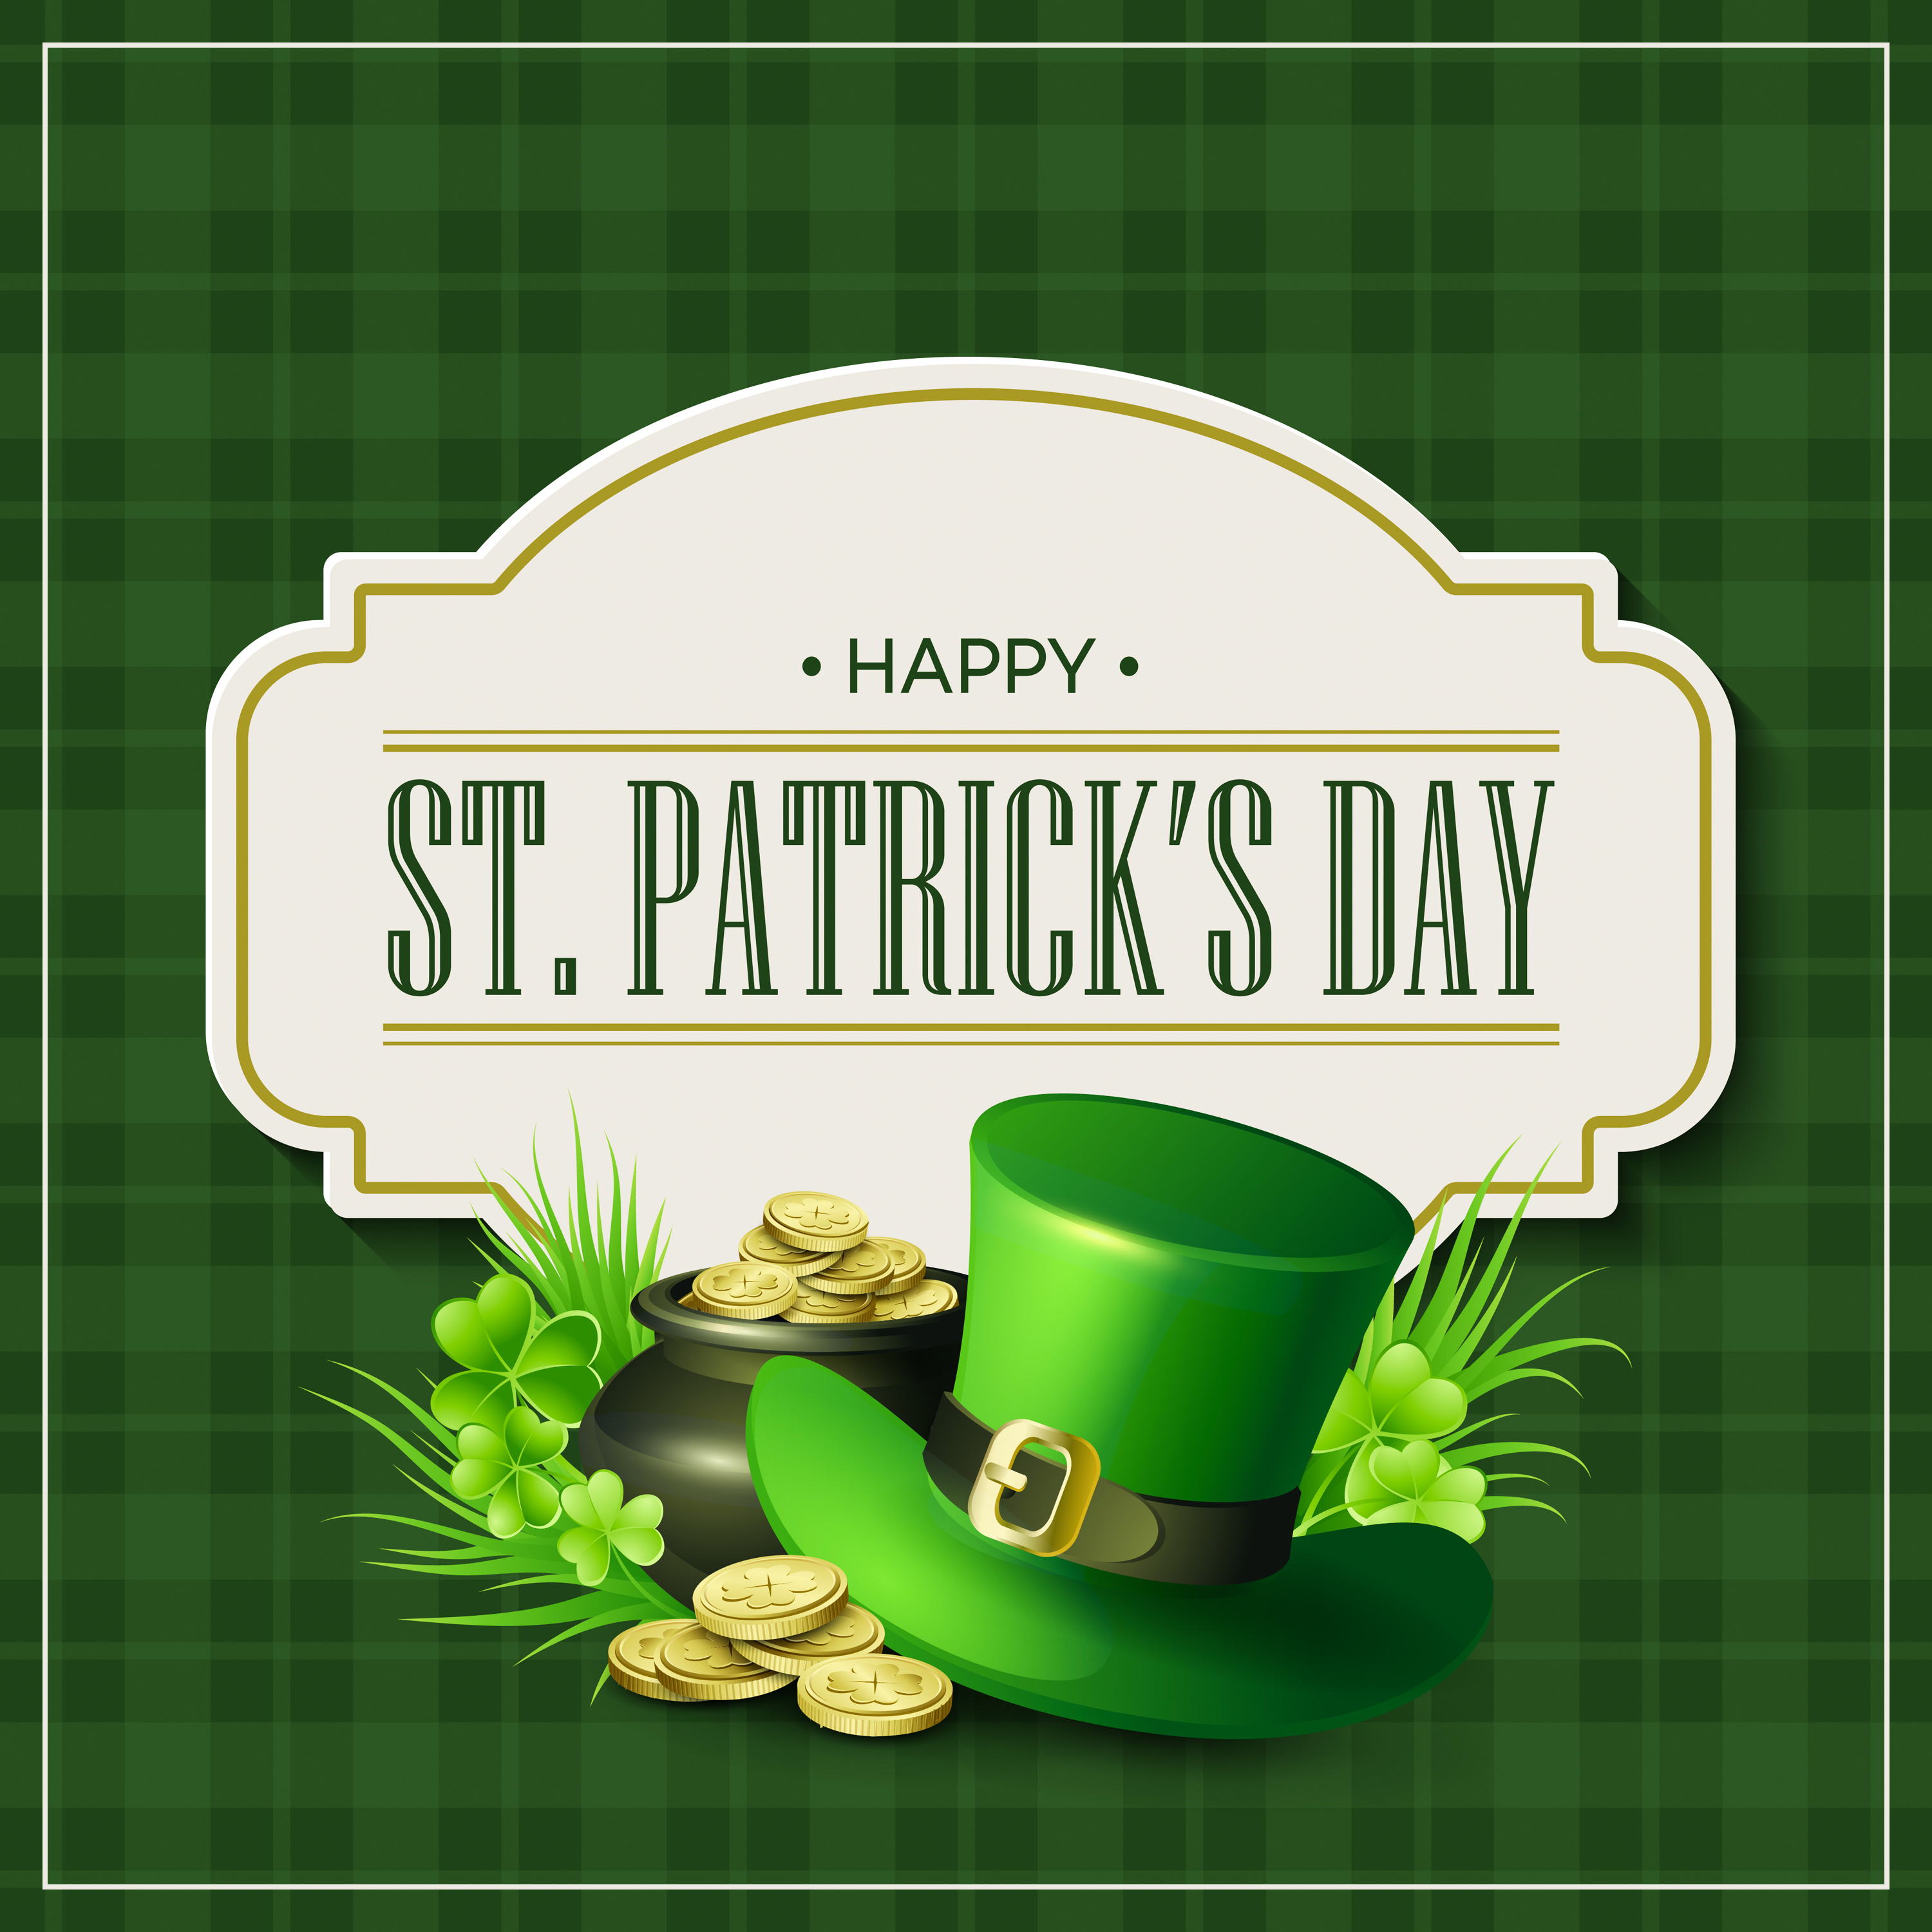 Happy St. Patrick's Day (Top 100, Best Instrumental Irish Folk Music, Party Music Festival, Celtic Spa Relaxation)